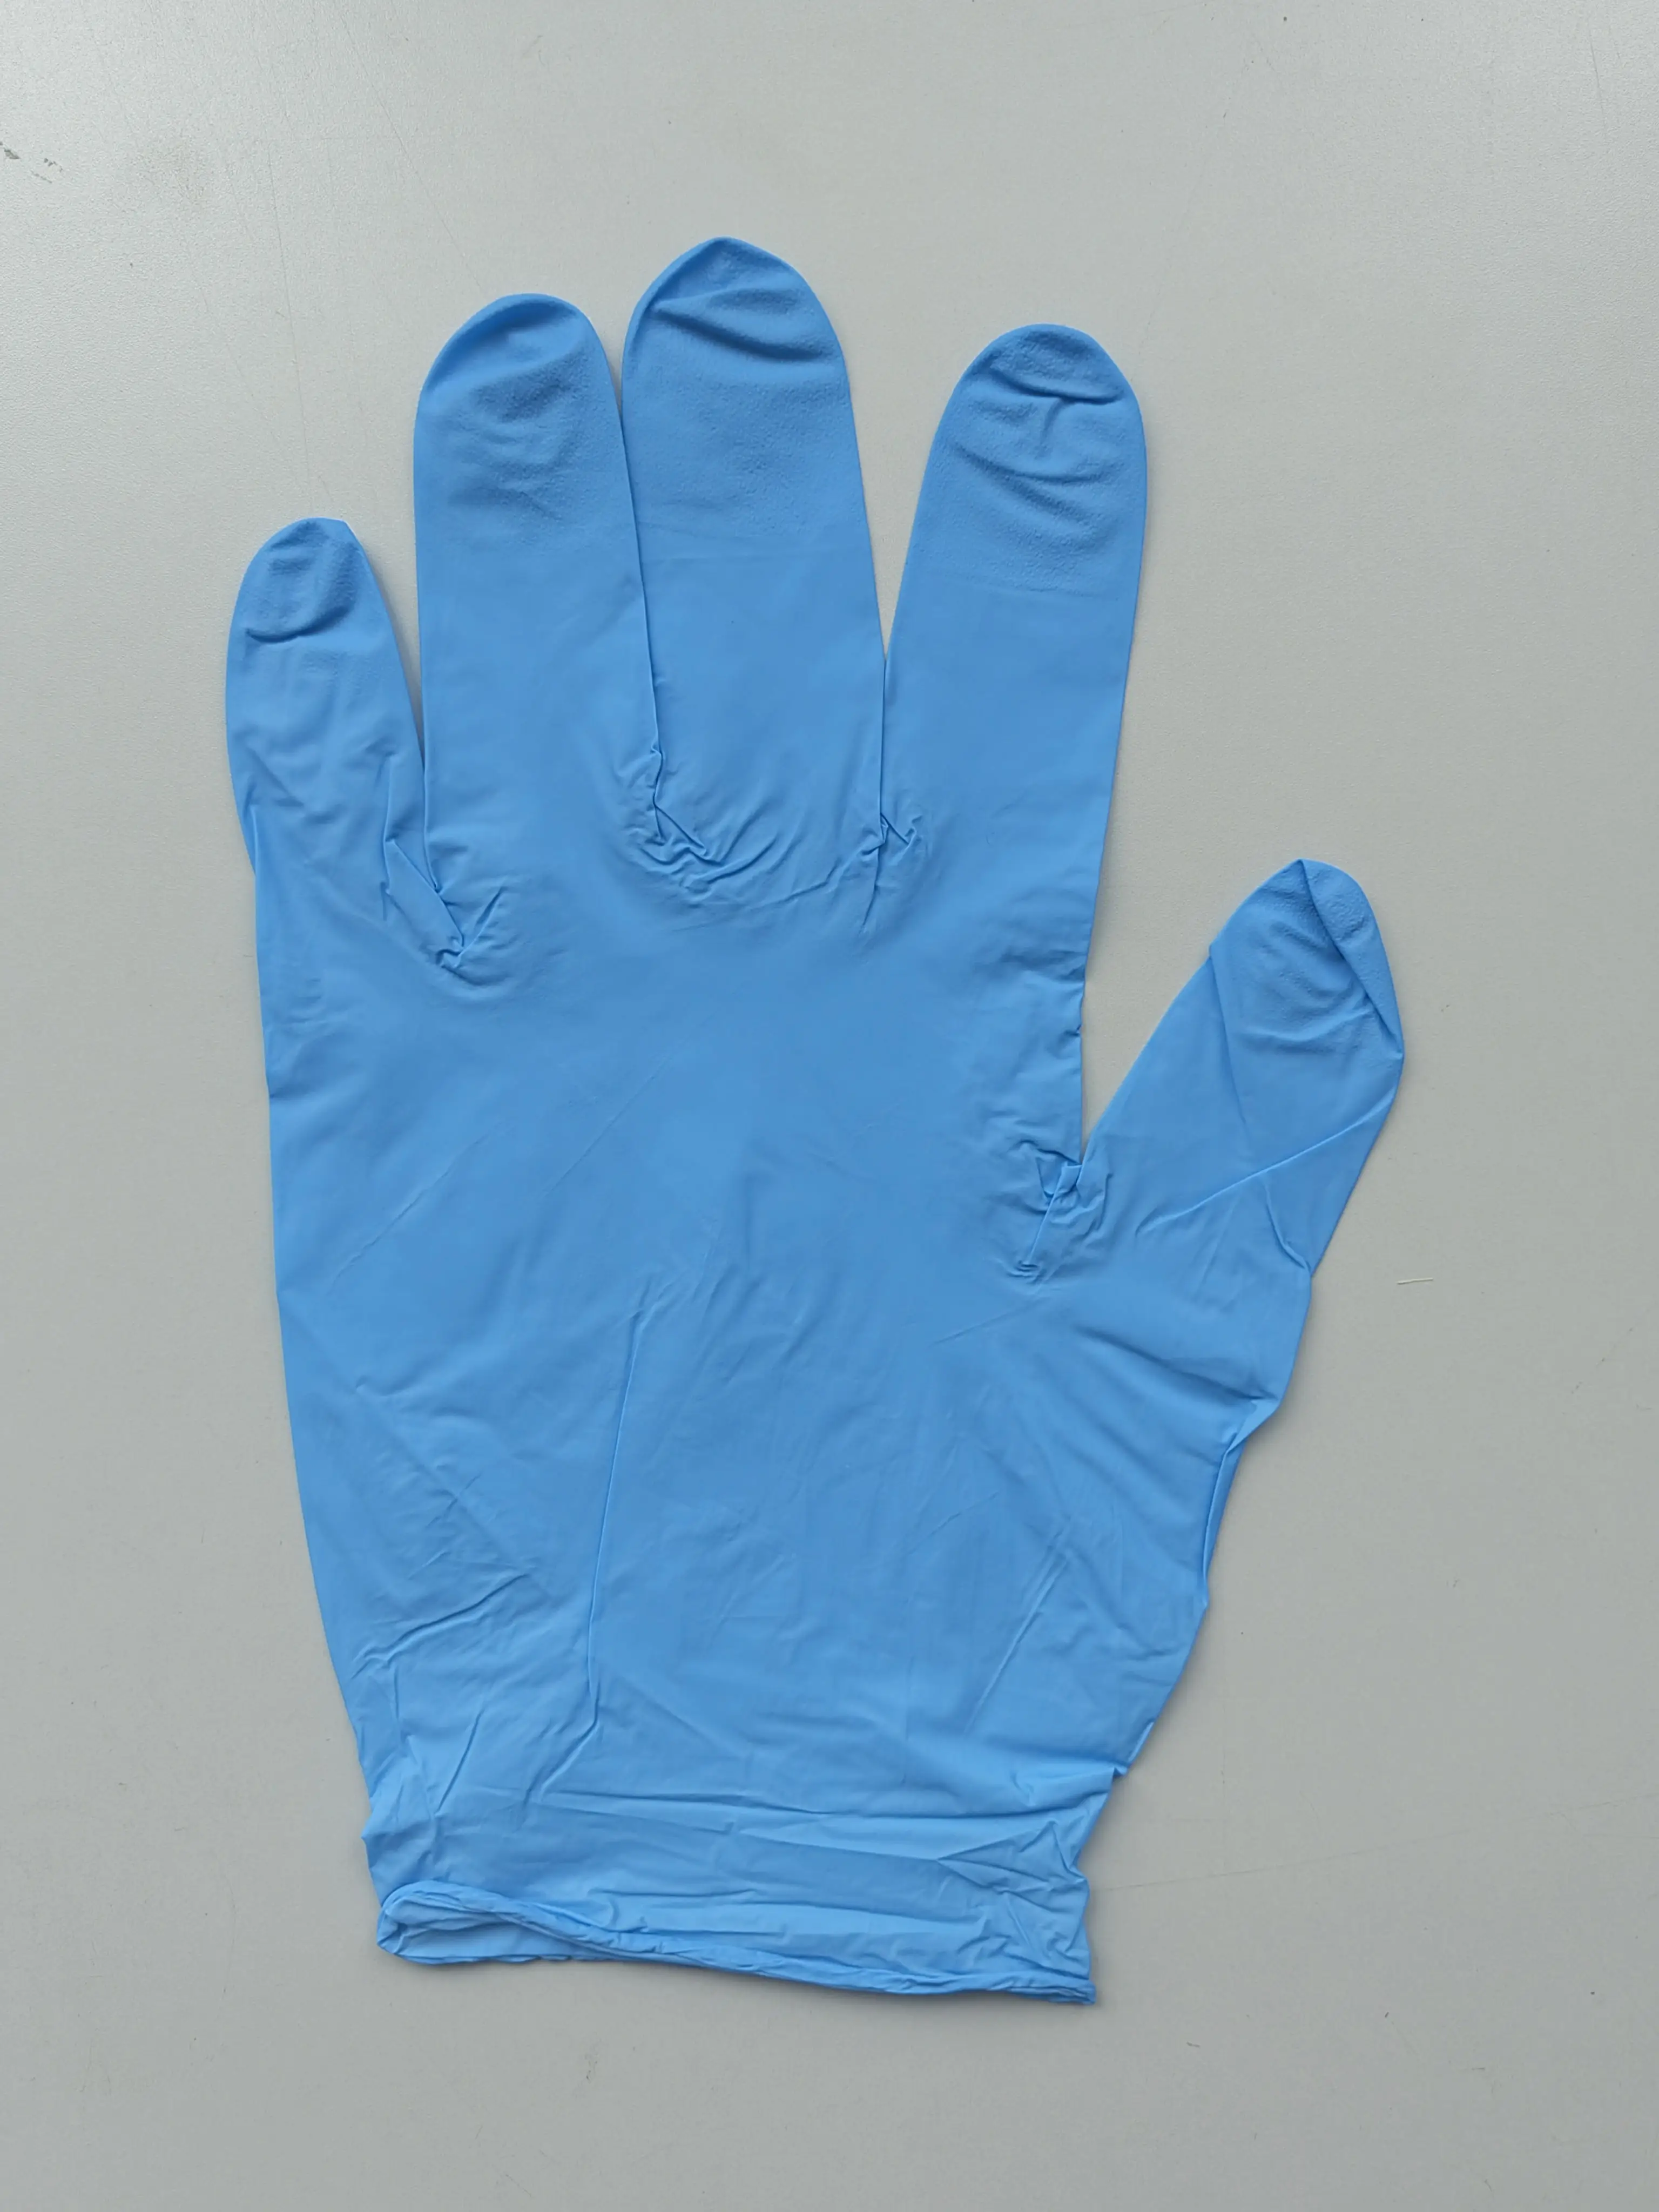 Factory Direct Wholesale Wide Application Household Cleaning Nitrile Glove